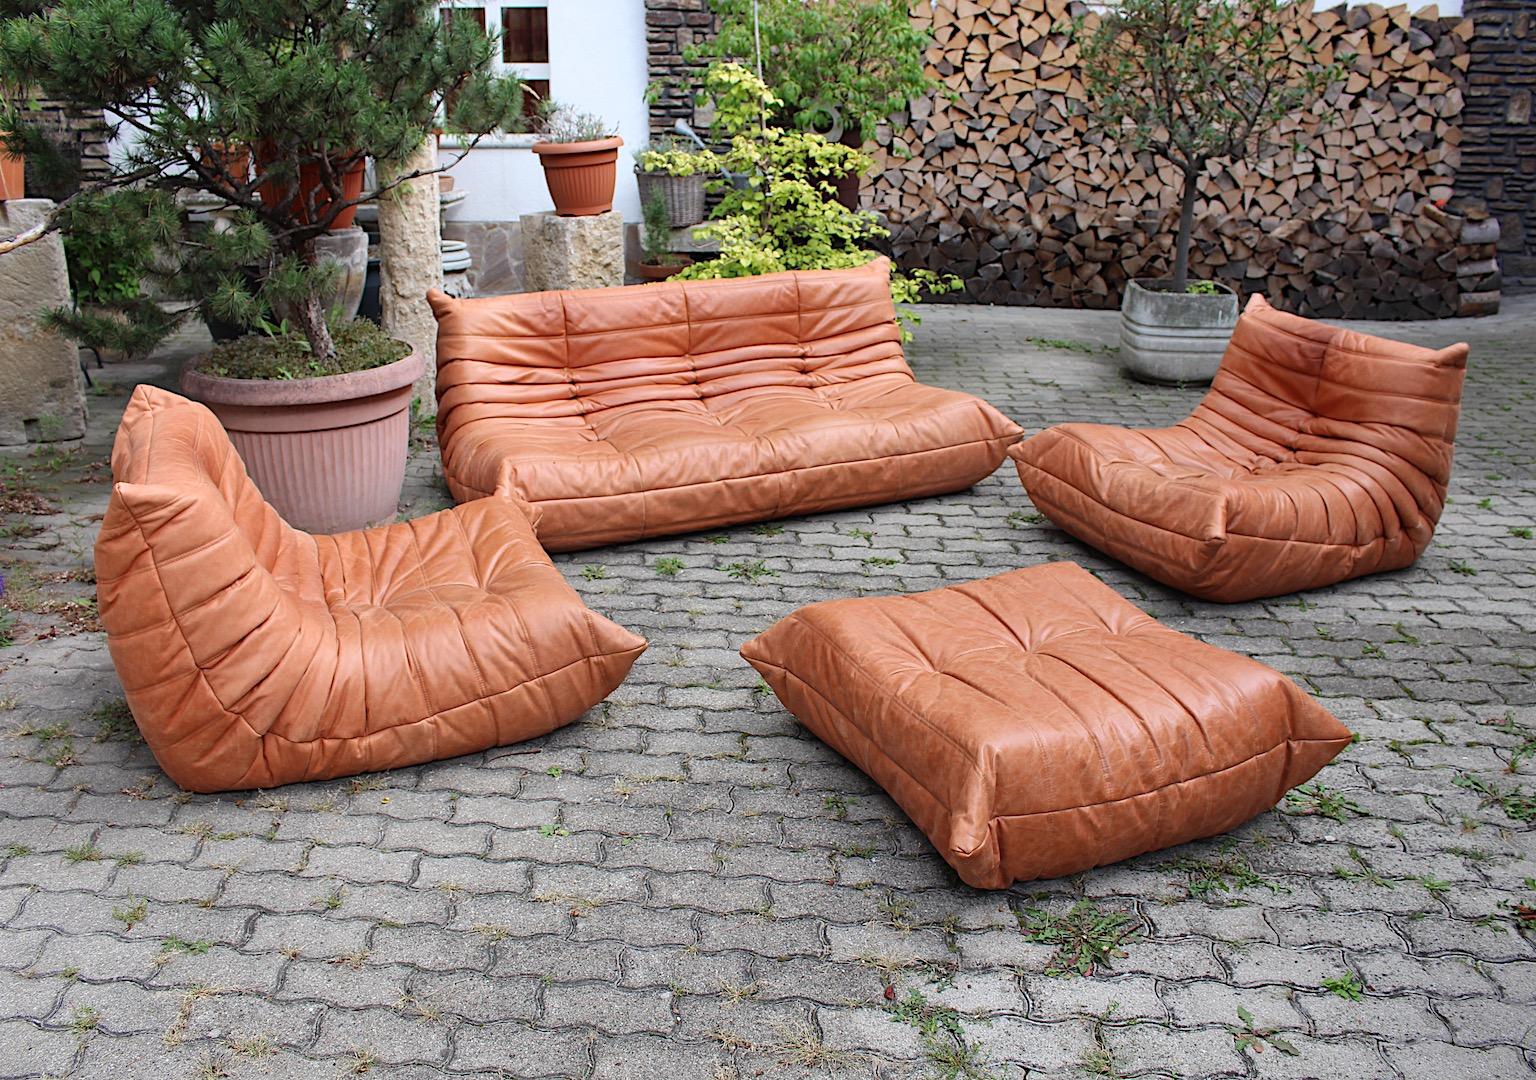 Togo vintage cognac brown four sectional sofa pieces leather settee designed Michel Ducaroy for Ligne Roset 1973.
Fantastic design from the 1970s with iconic character and cosy pleats and wrinkles, perfect to style your own ideas from a